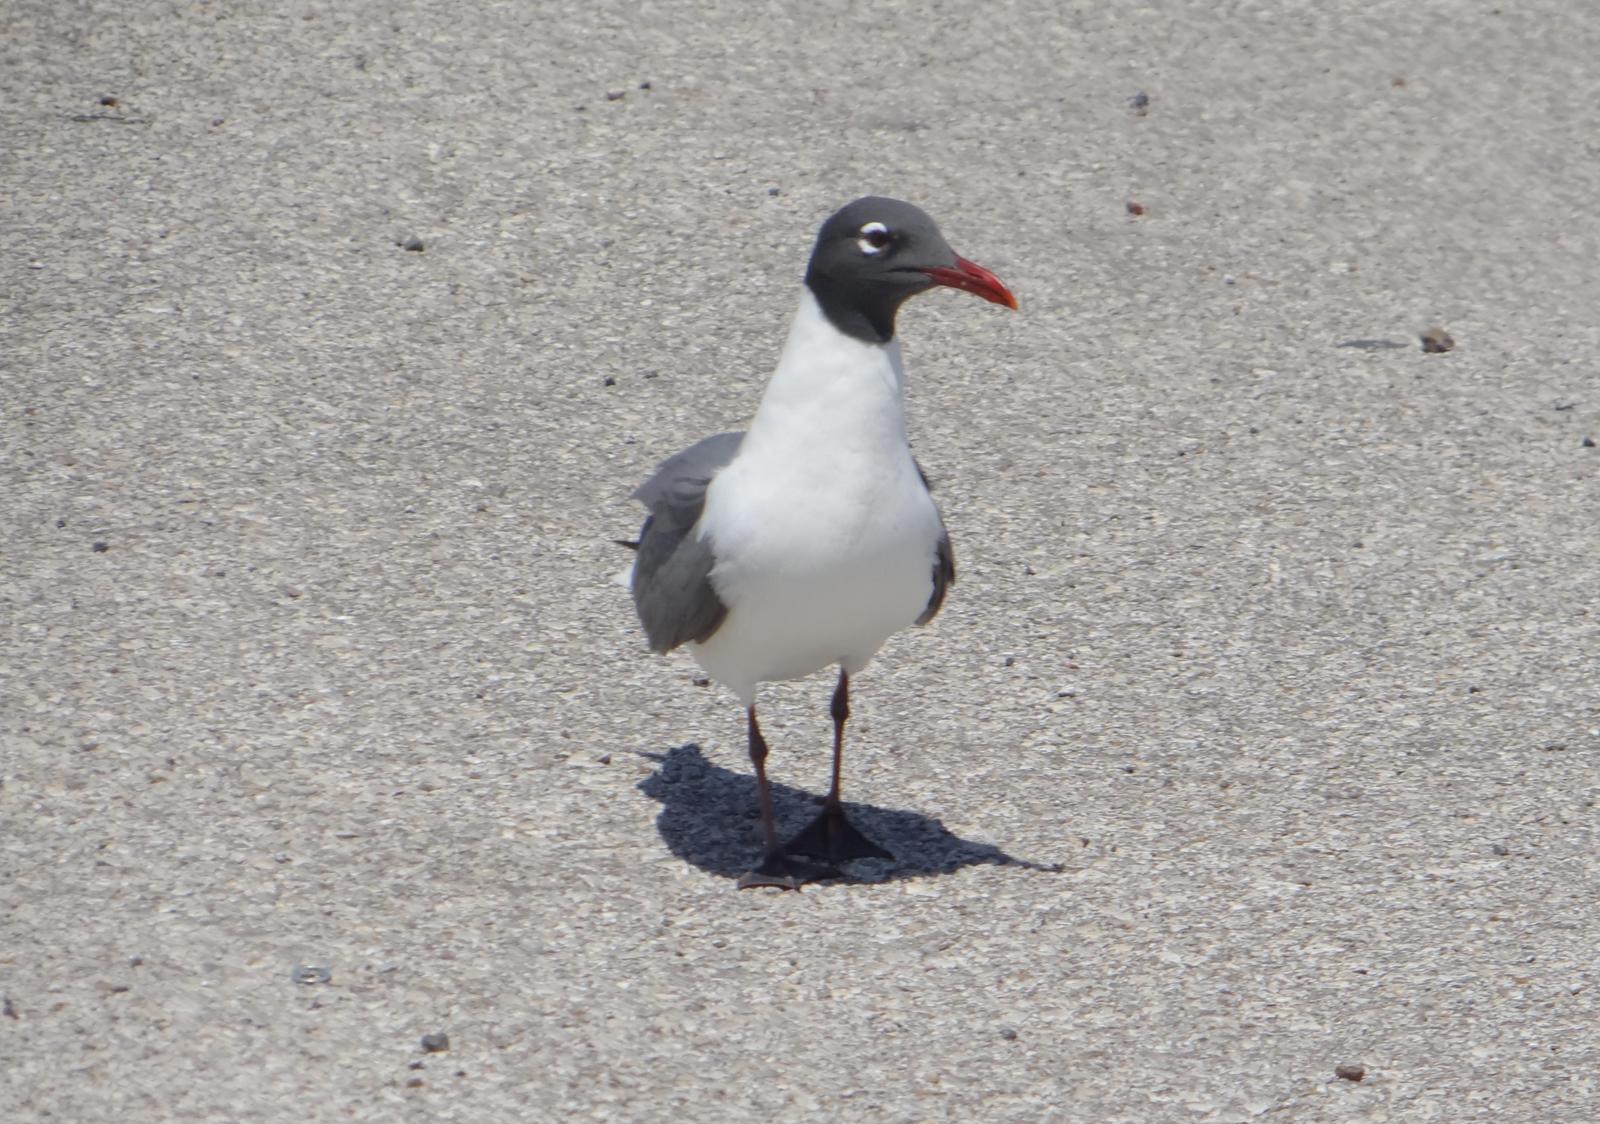 Laughing Gull Photo by Jeff Hardy